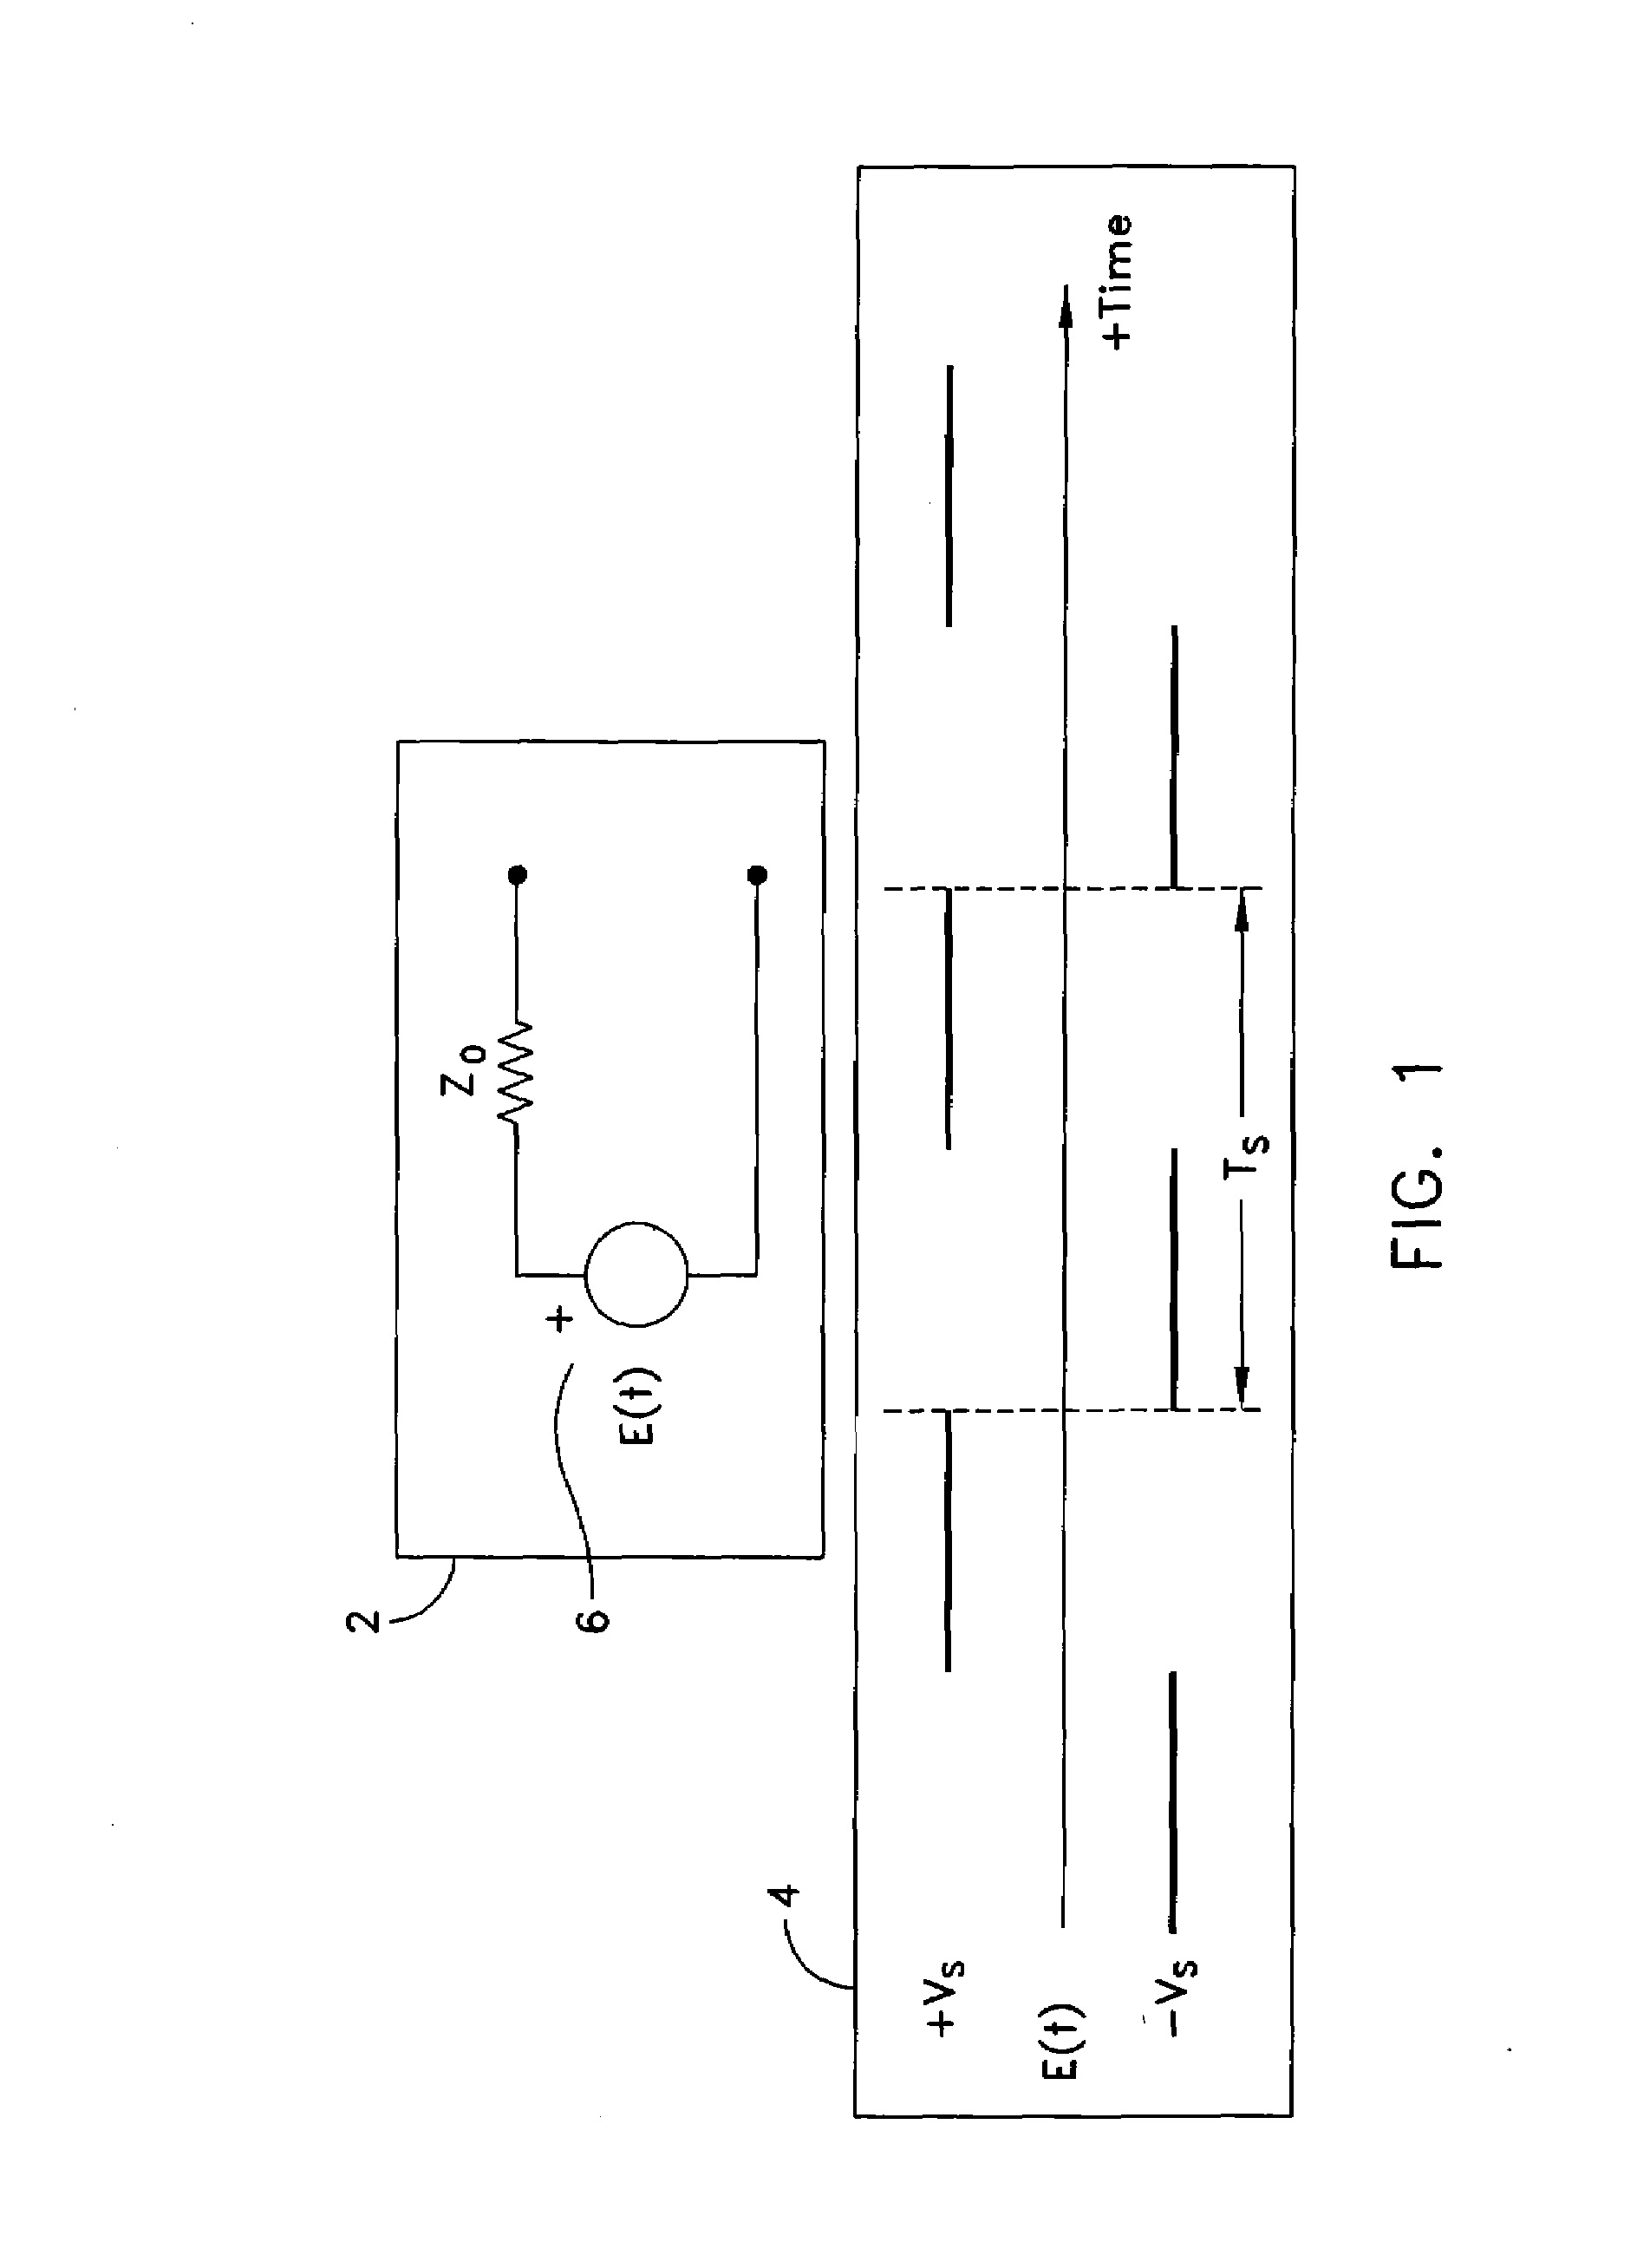 Method for Coupling a Direct Current Power Source Across a Nearly Frictionless High-Speed Rotation Boundary